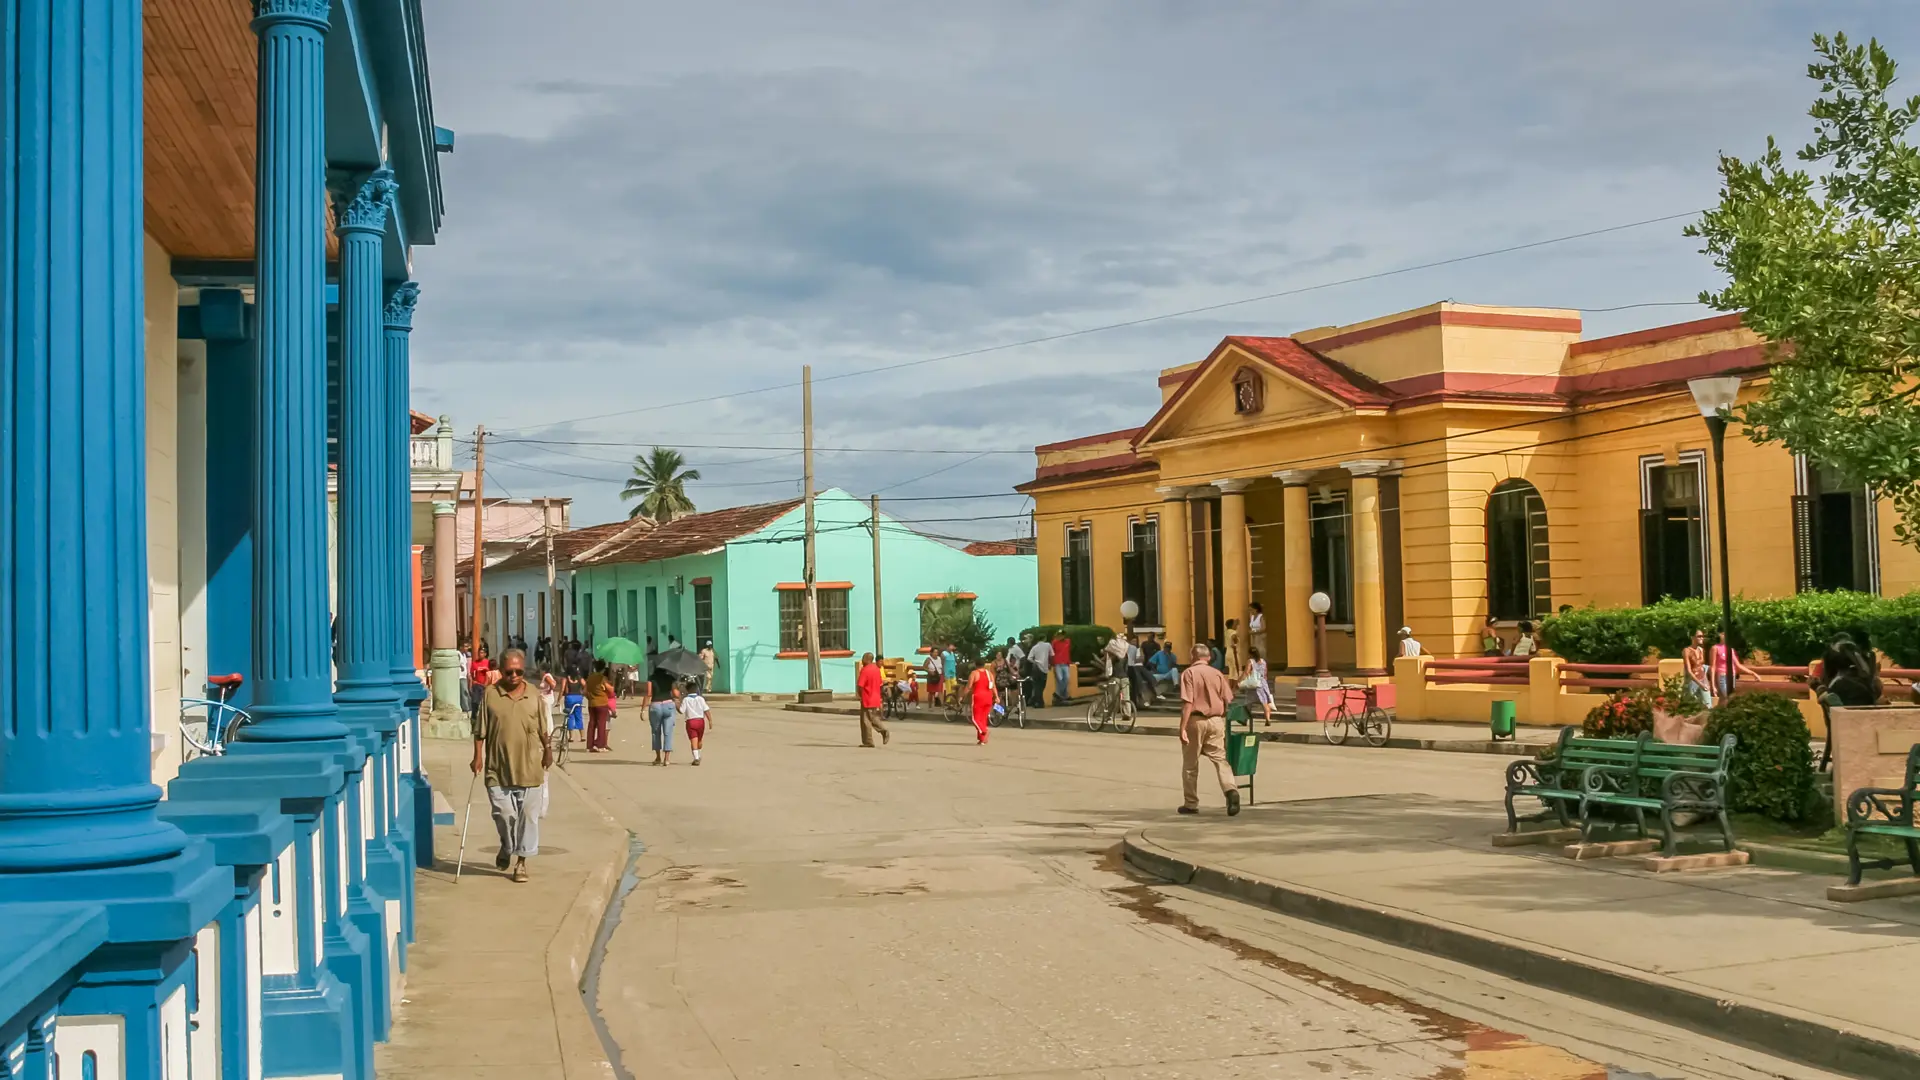 shutterstock_451773604 Street with colorful houses in colonial town Baracoa, Cuba.jpg